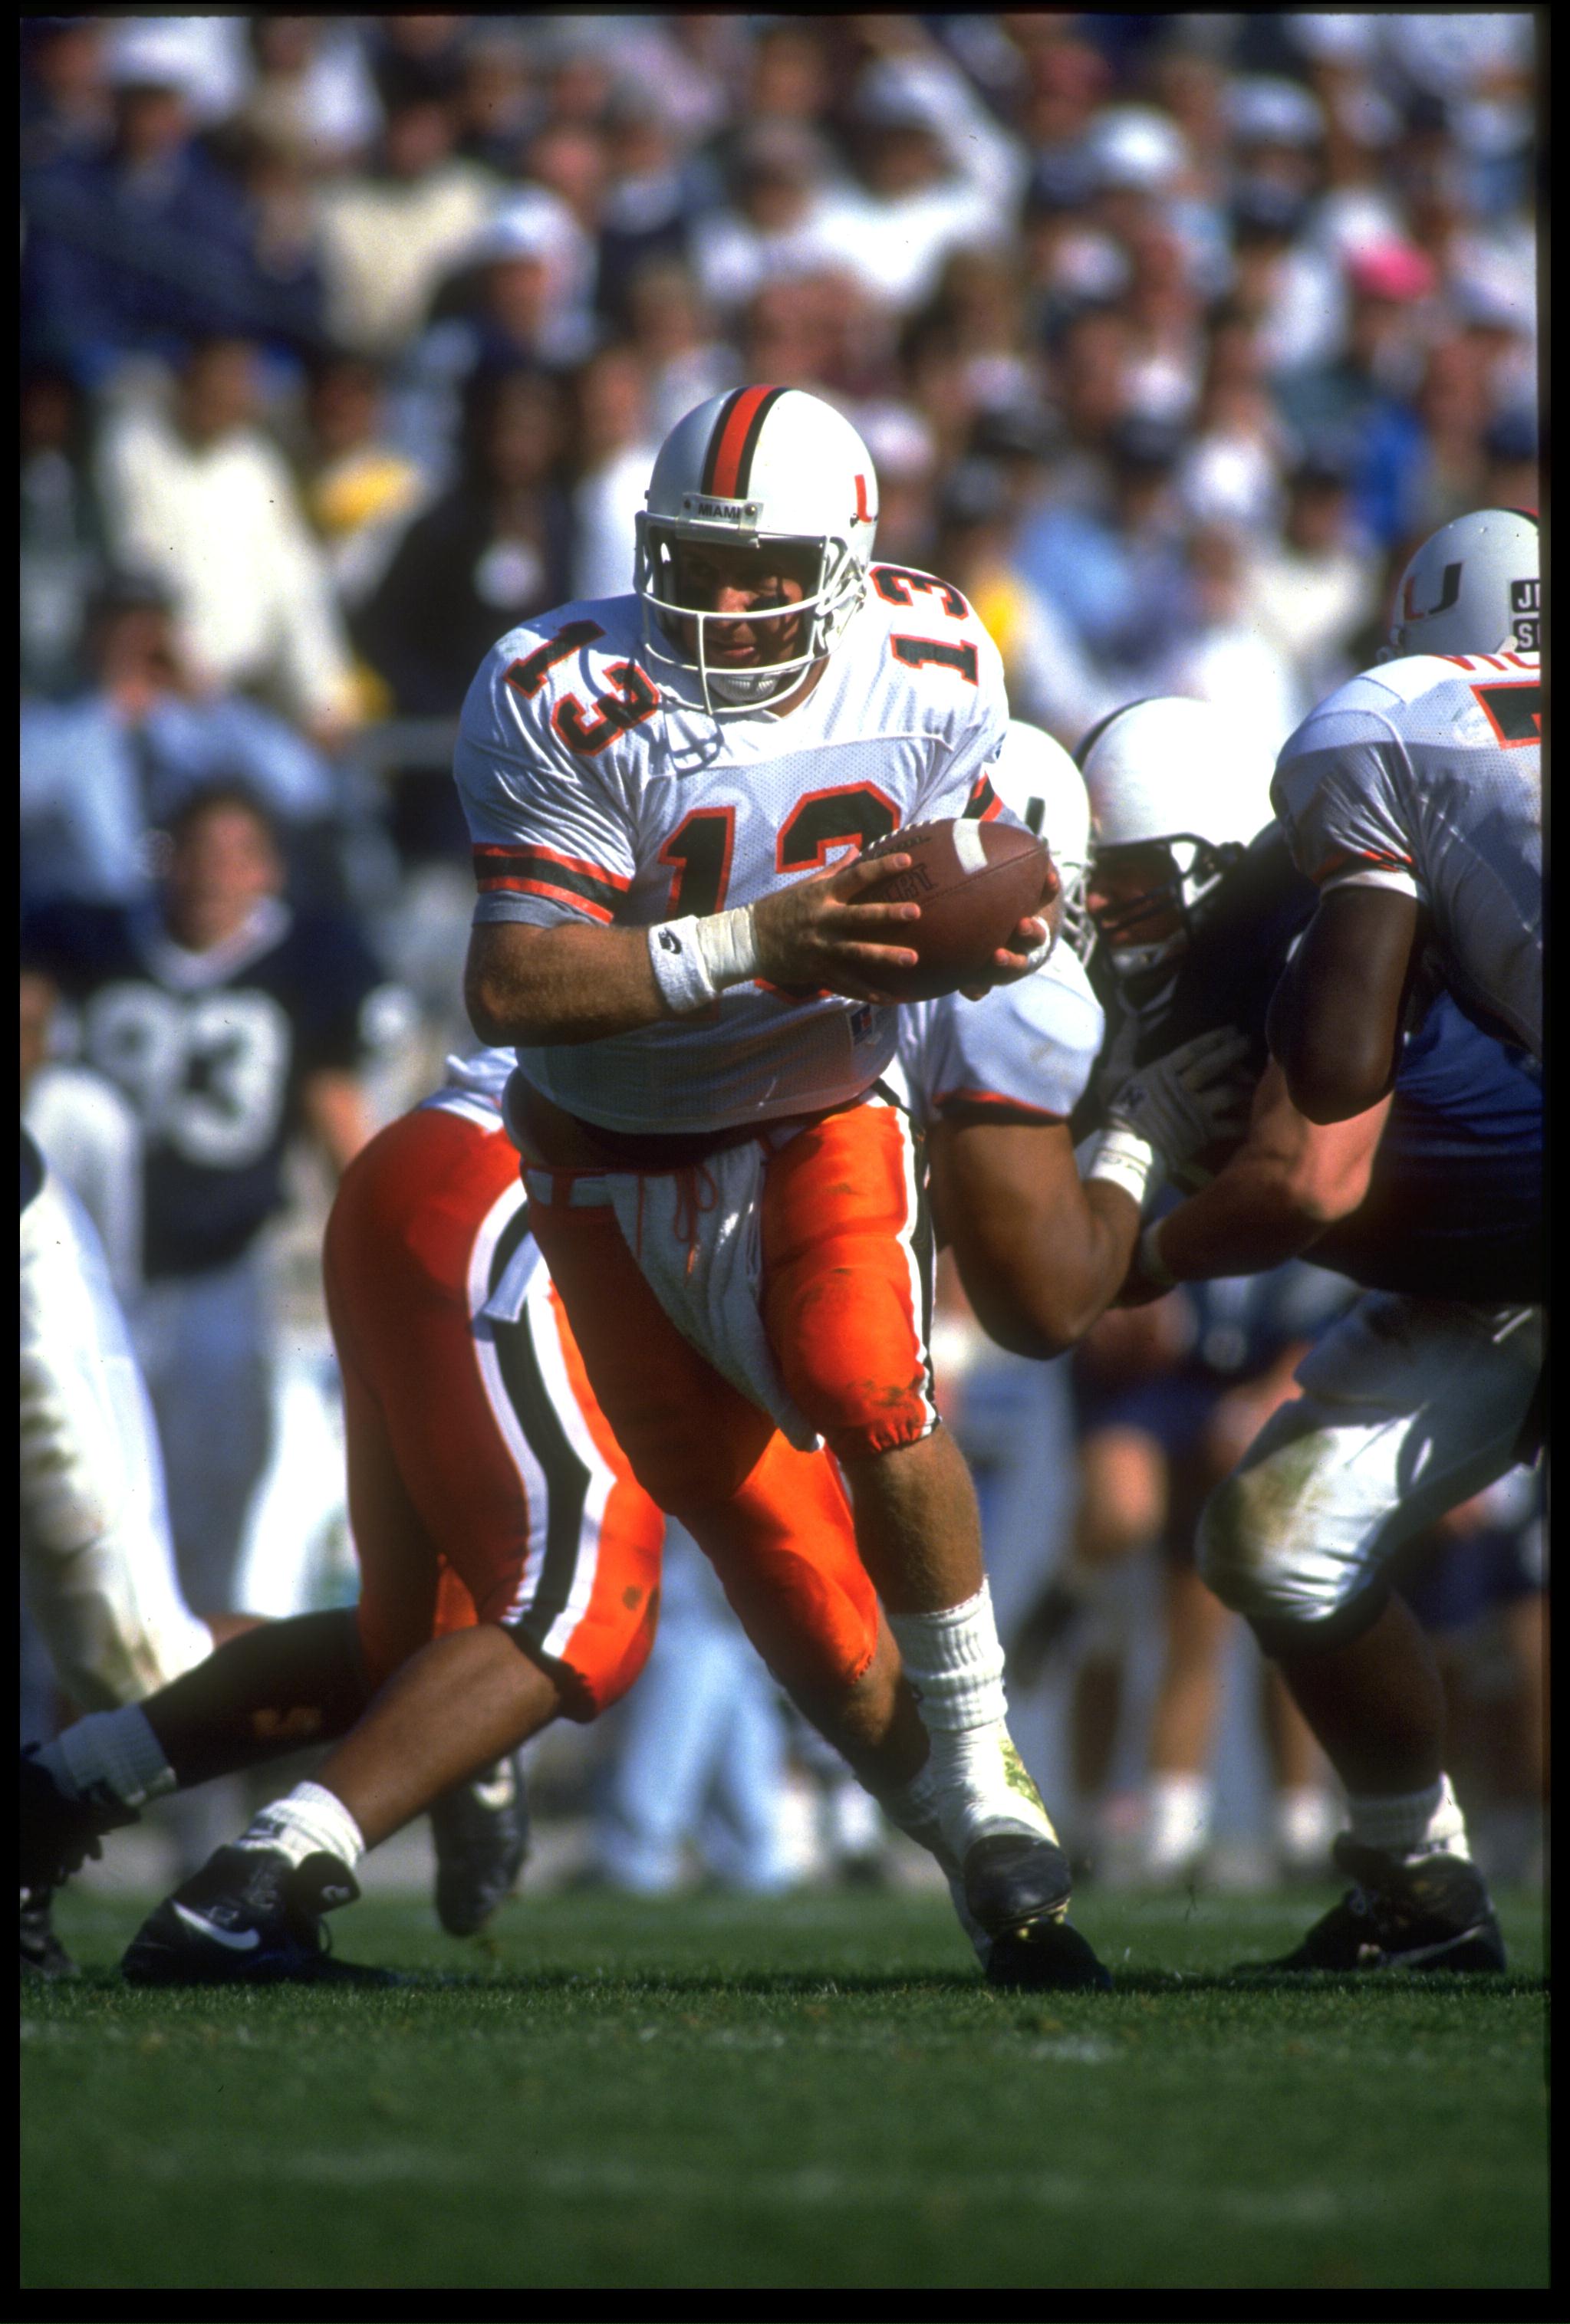 10 Oct 1992: UNIVERSITY OF MIAMI QUARTERBACK GINO TORRETTA LOOKS TO HAND OFF DURING THE HURRICANES 17-14 WIN OVER THE PENN STATE NITTANY LIONS AT BEAVER STADIUM IN UNIVERSITY PARK, PENNSYLVANIA